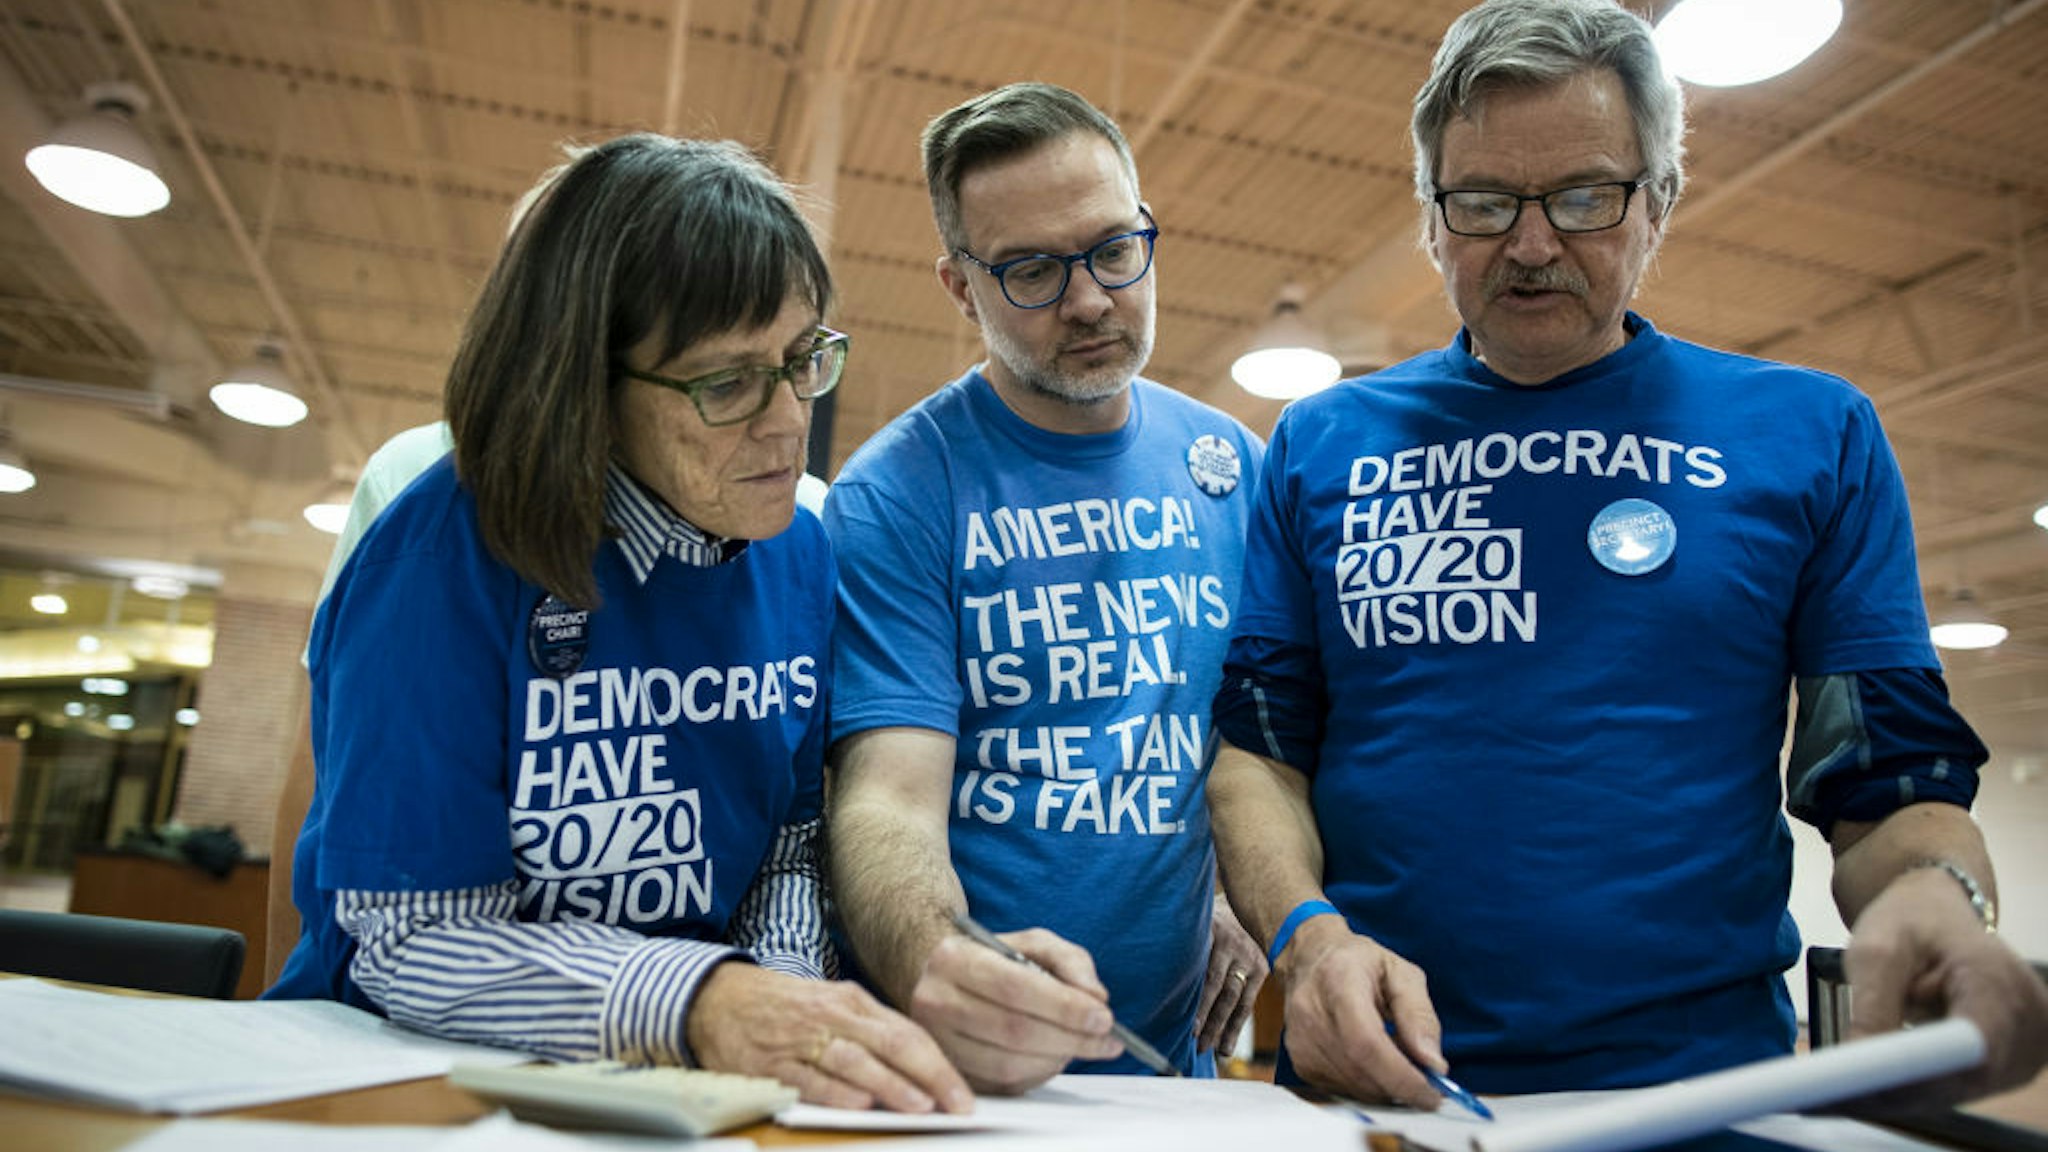 Volunteers tally votes during the first-in-the-nation Iowa caucus at the Southridge Mall in Des Moines, Iowa, U.S., on Monday, Feb. 3, 2020.